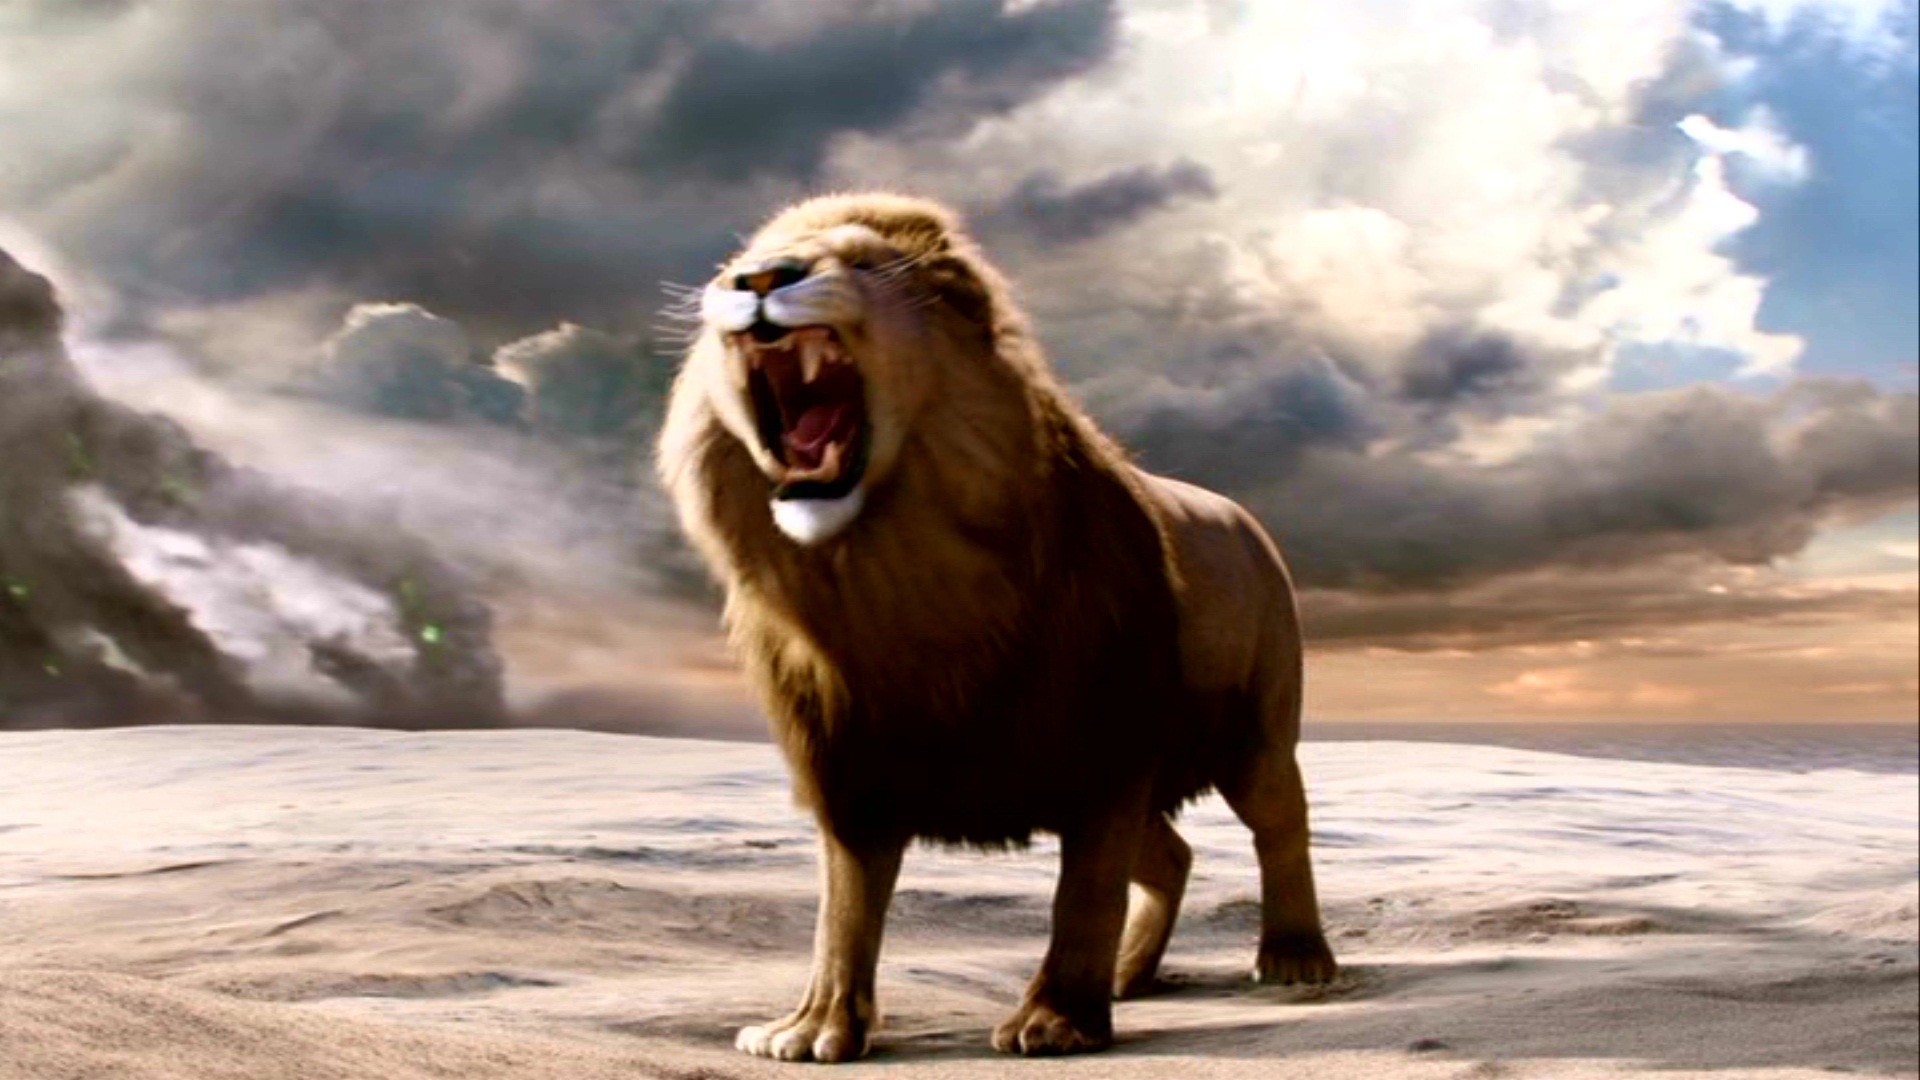 1920x1080 The Chronicles of Narnia: The Voyage of the Dawn Treader HD Wallpaper |  Hintergrund |  | ID:121379 - Wallpaper Abyss